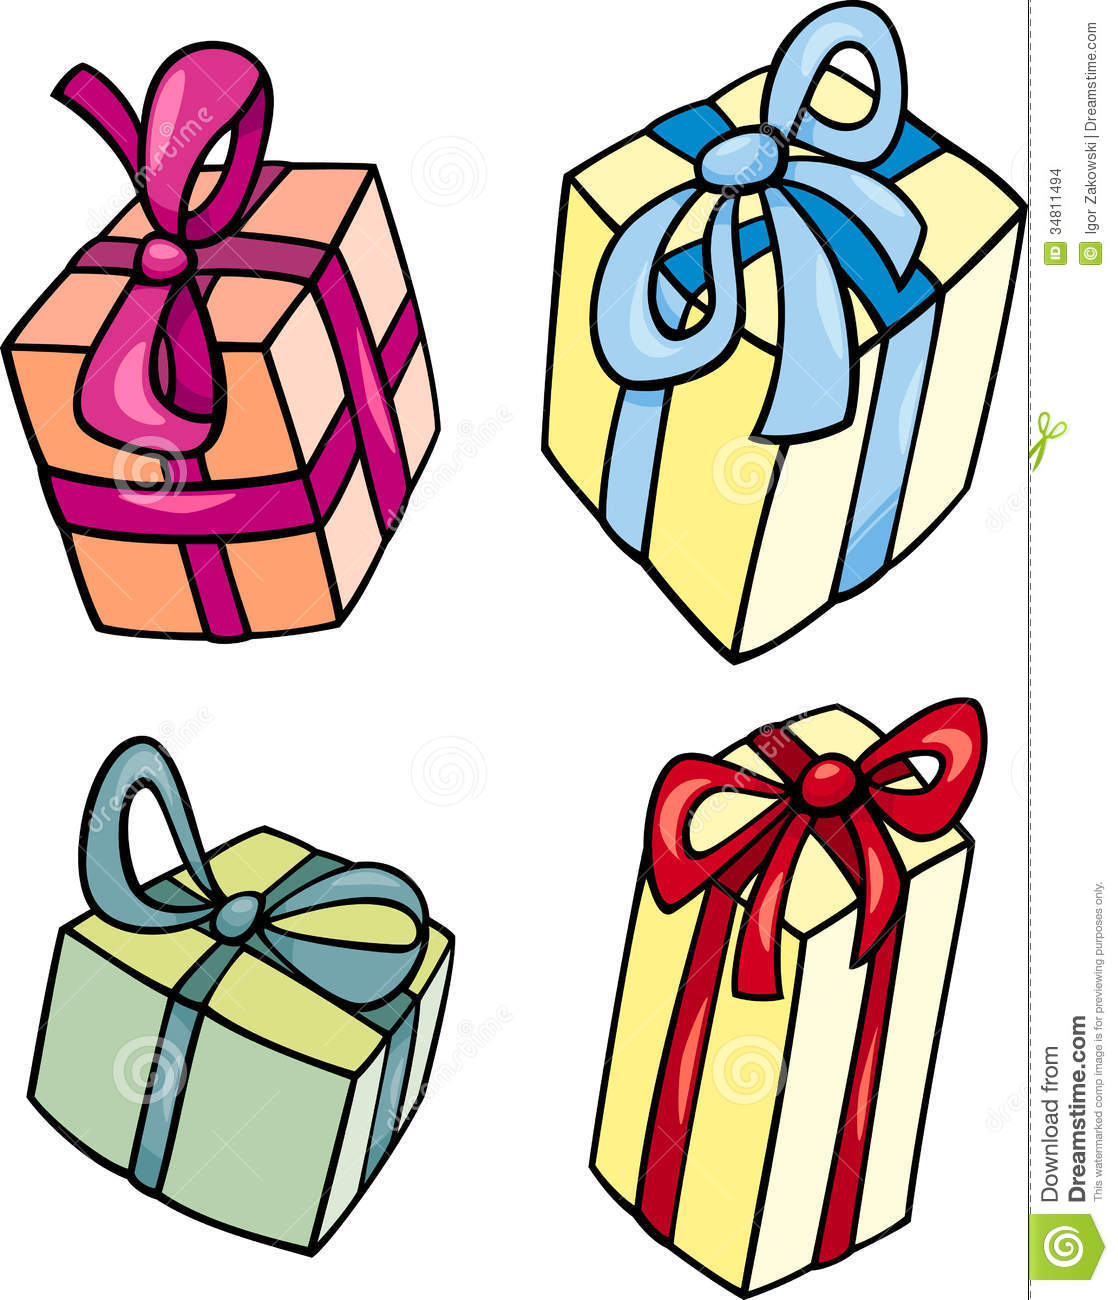 Christmas Or Birthday Gift Clip Art Set Stock Images   Image  34811494